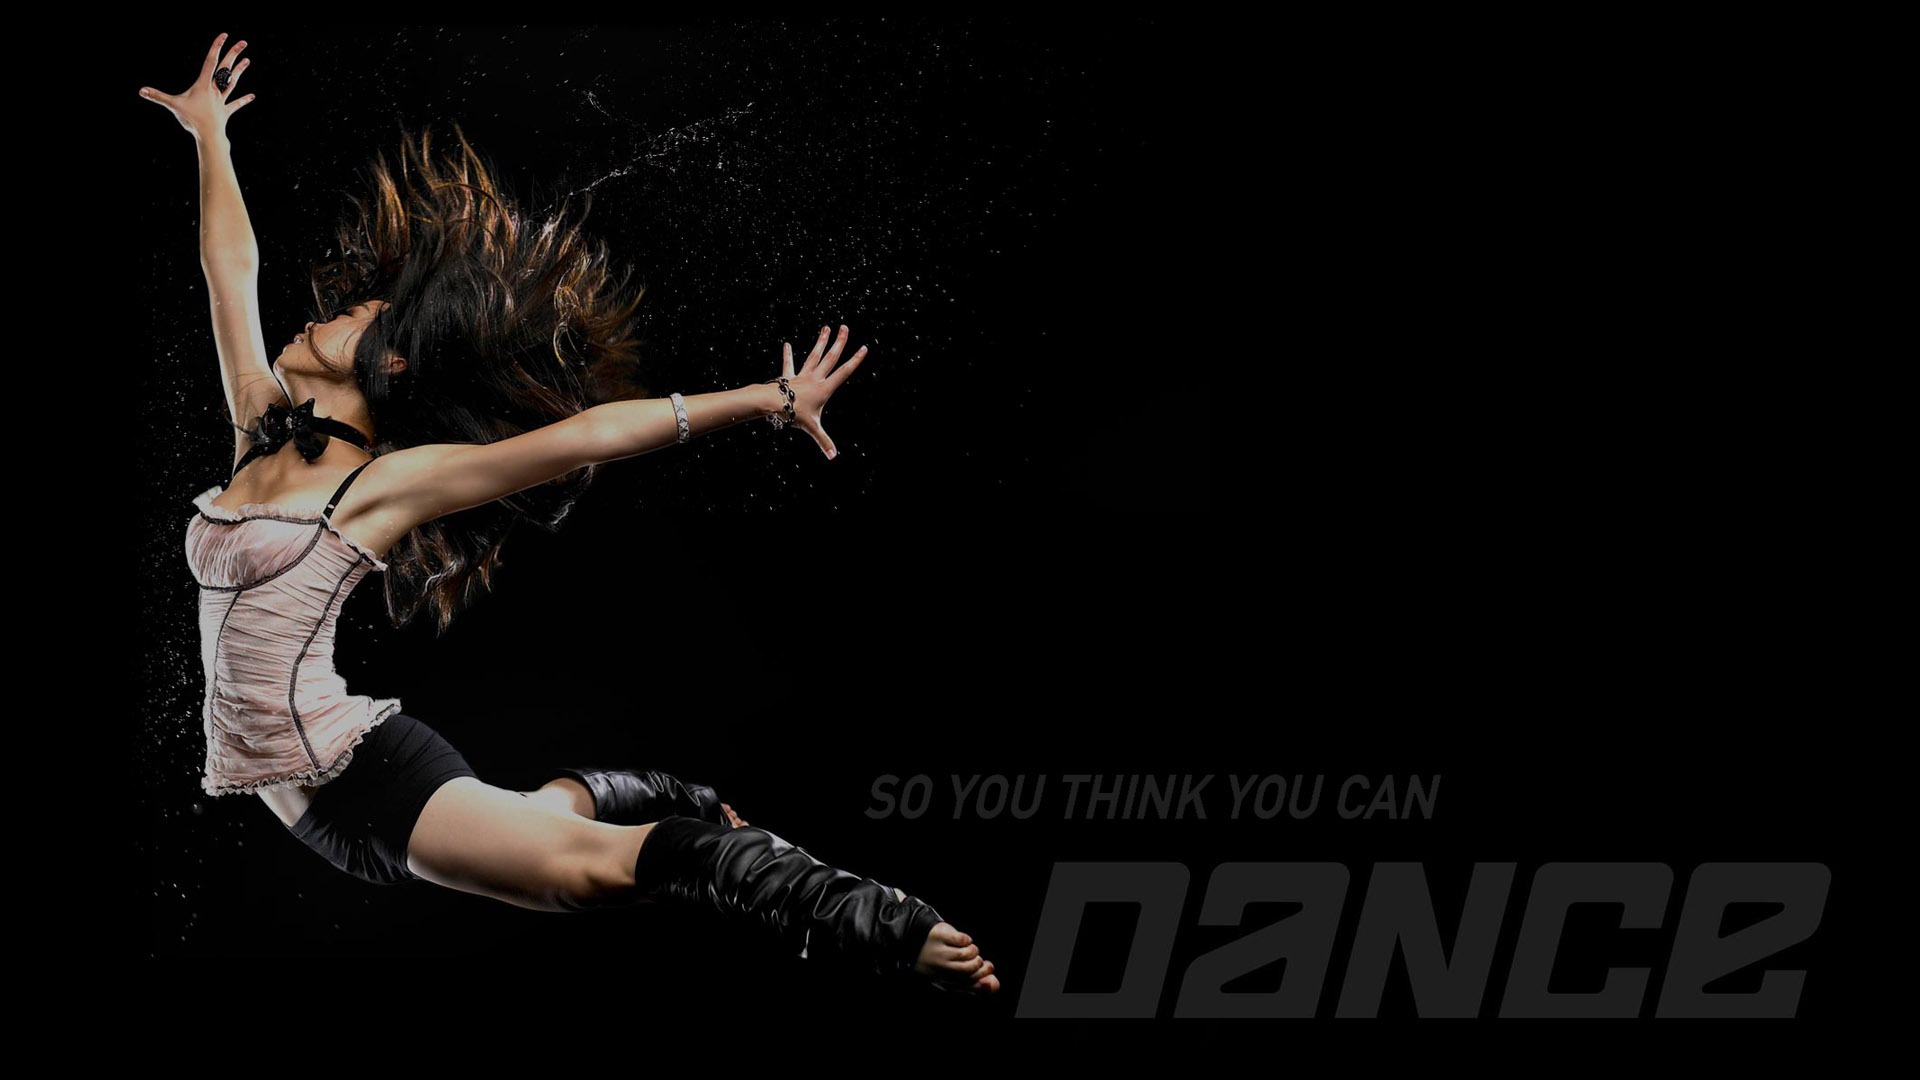 So You Think You Can Dance 舞林争霸 壁纸(一)1 - 1920x1080